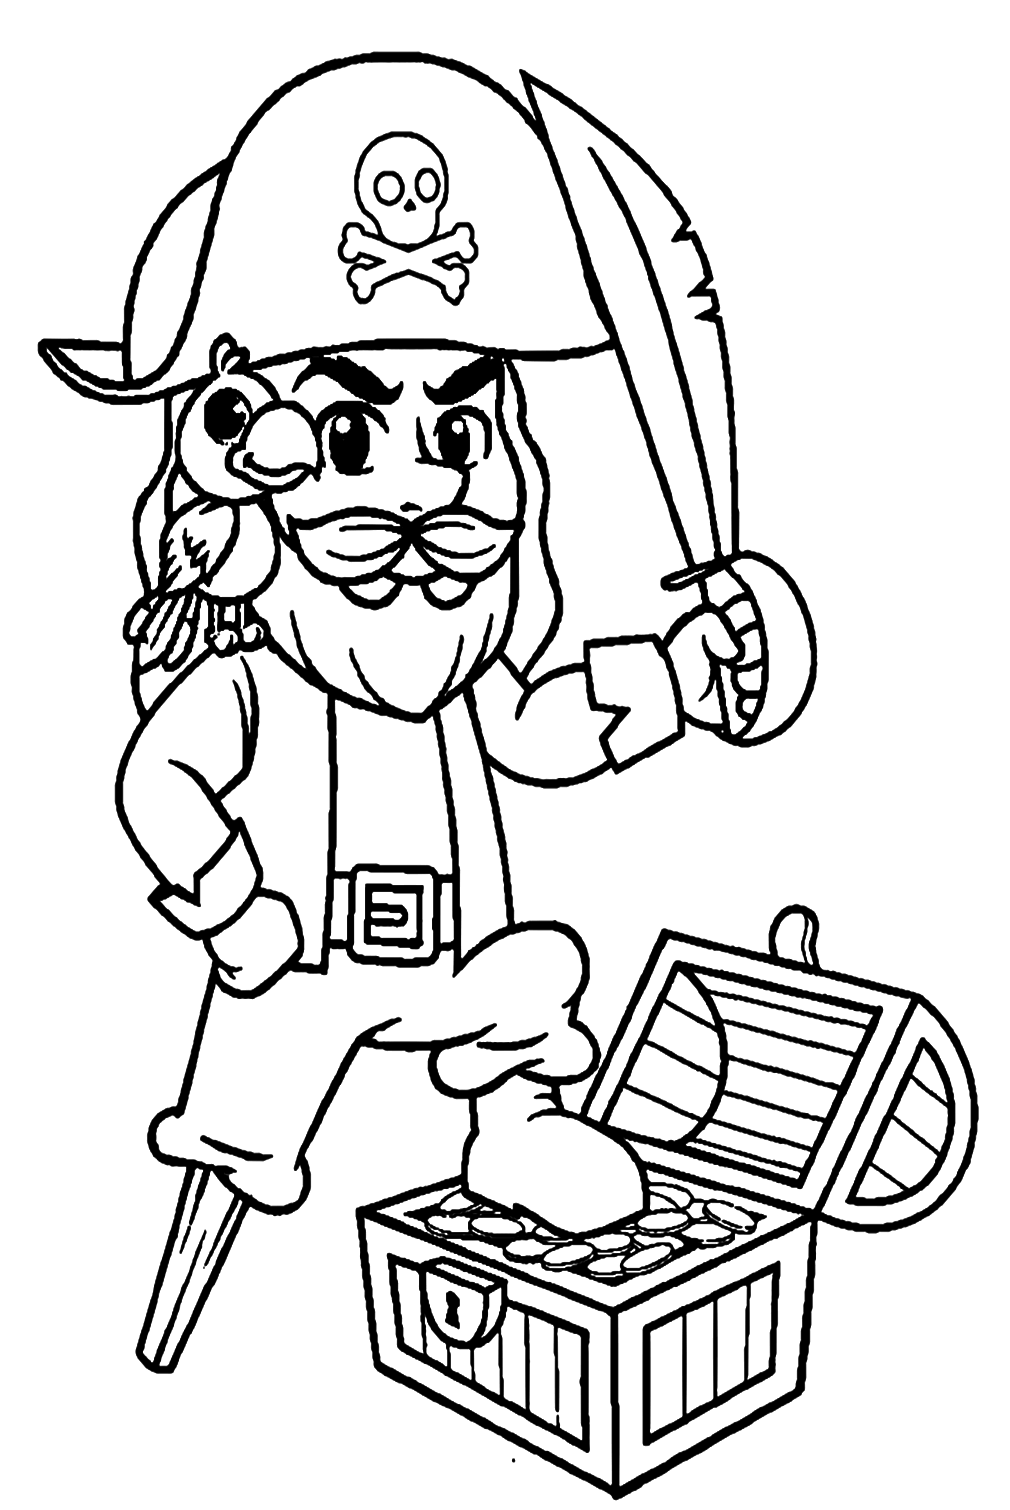 Pirate With Treasure Chest Coloring Pages